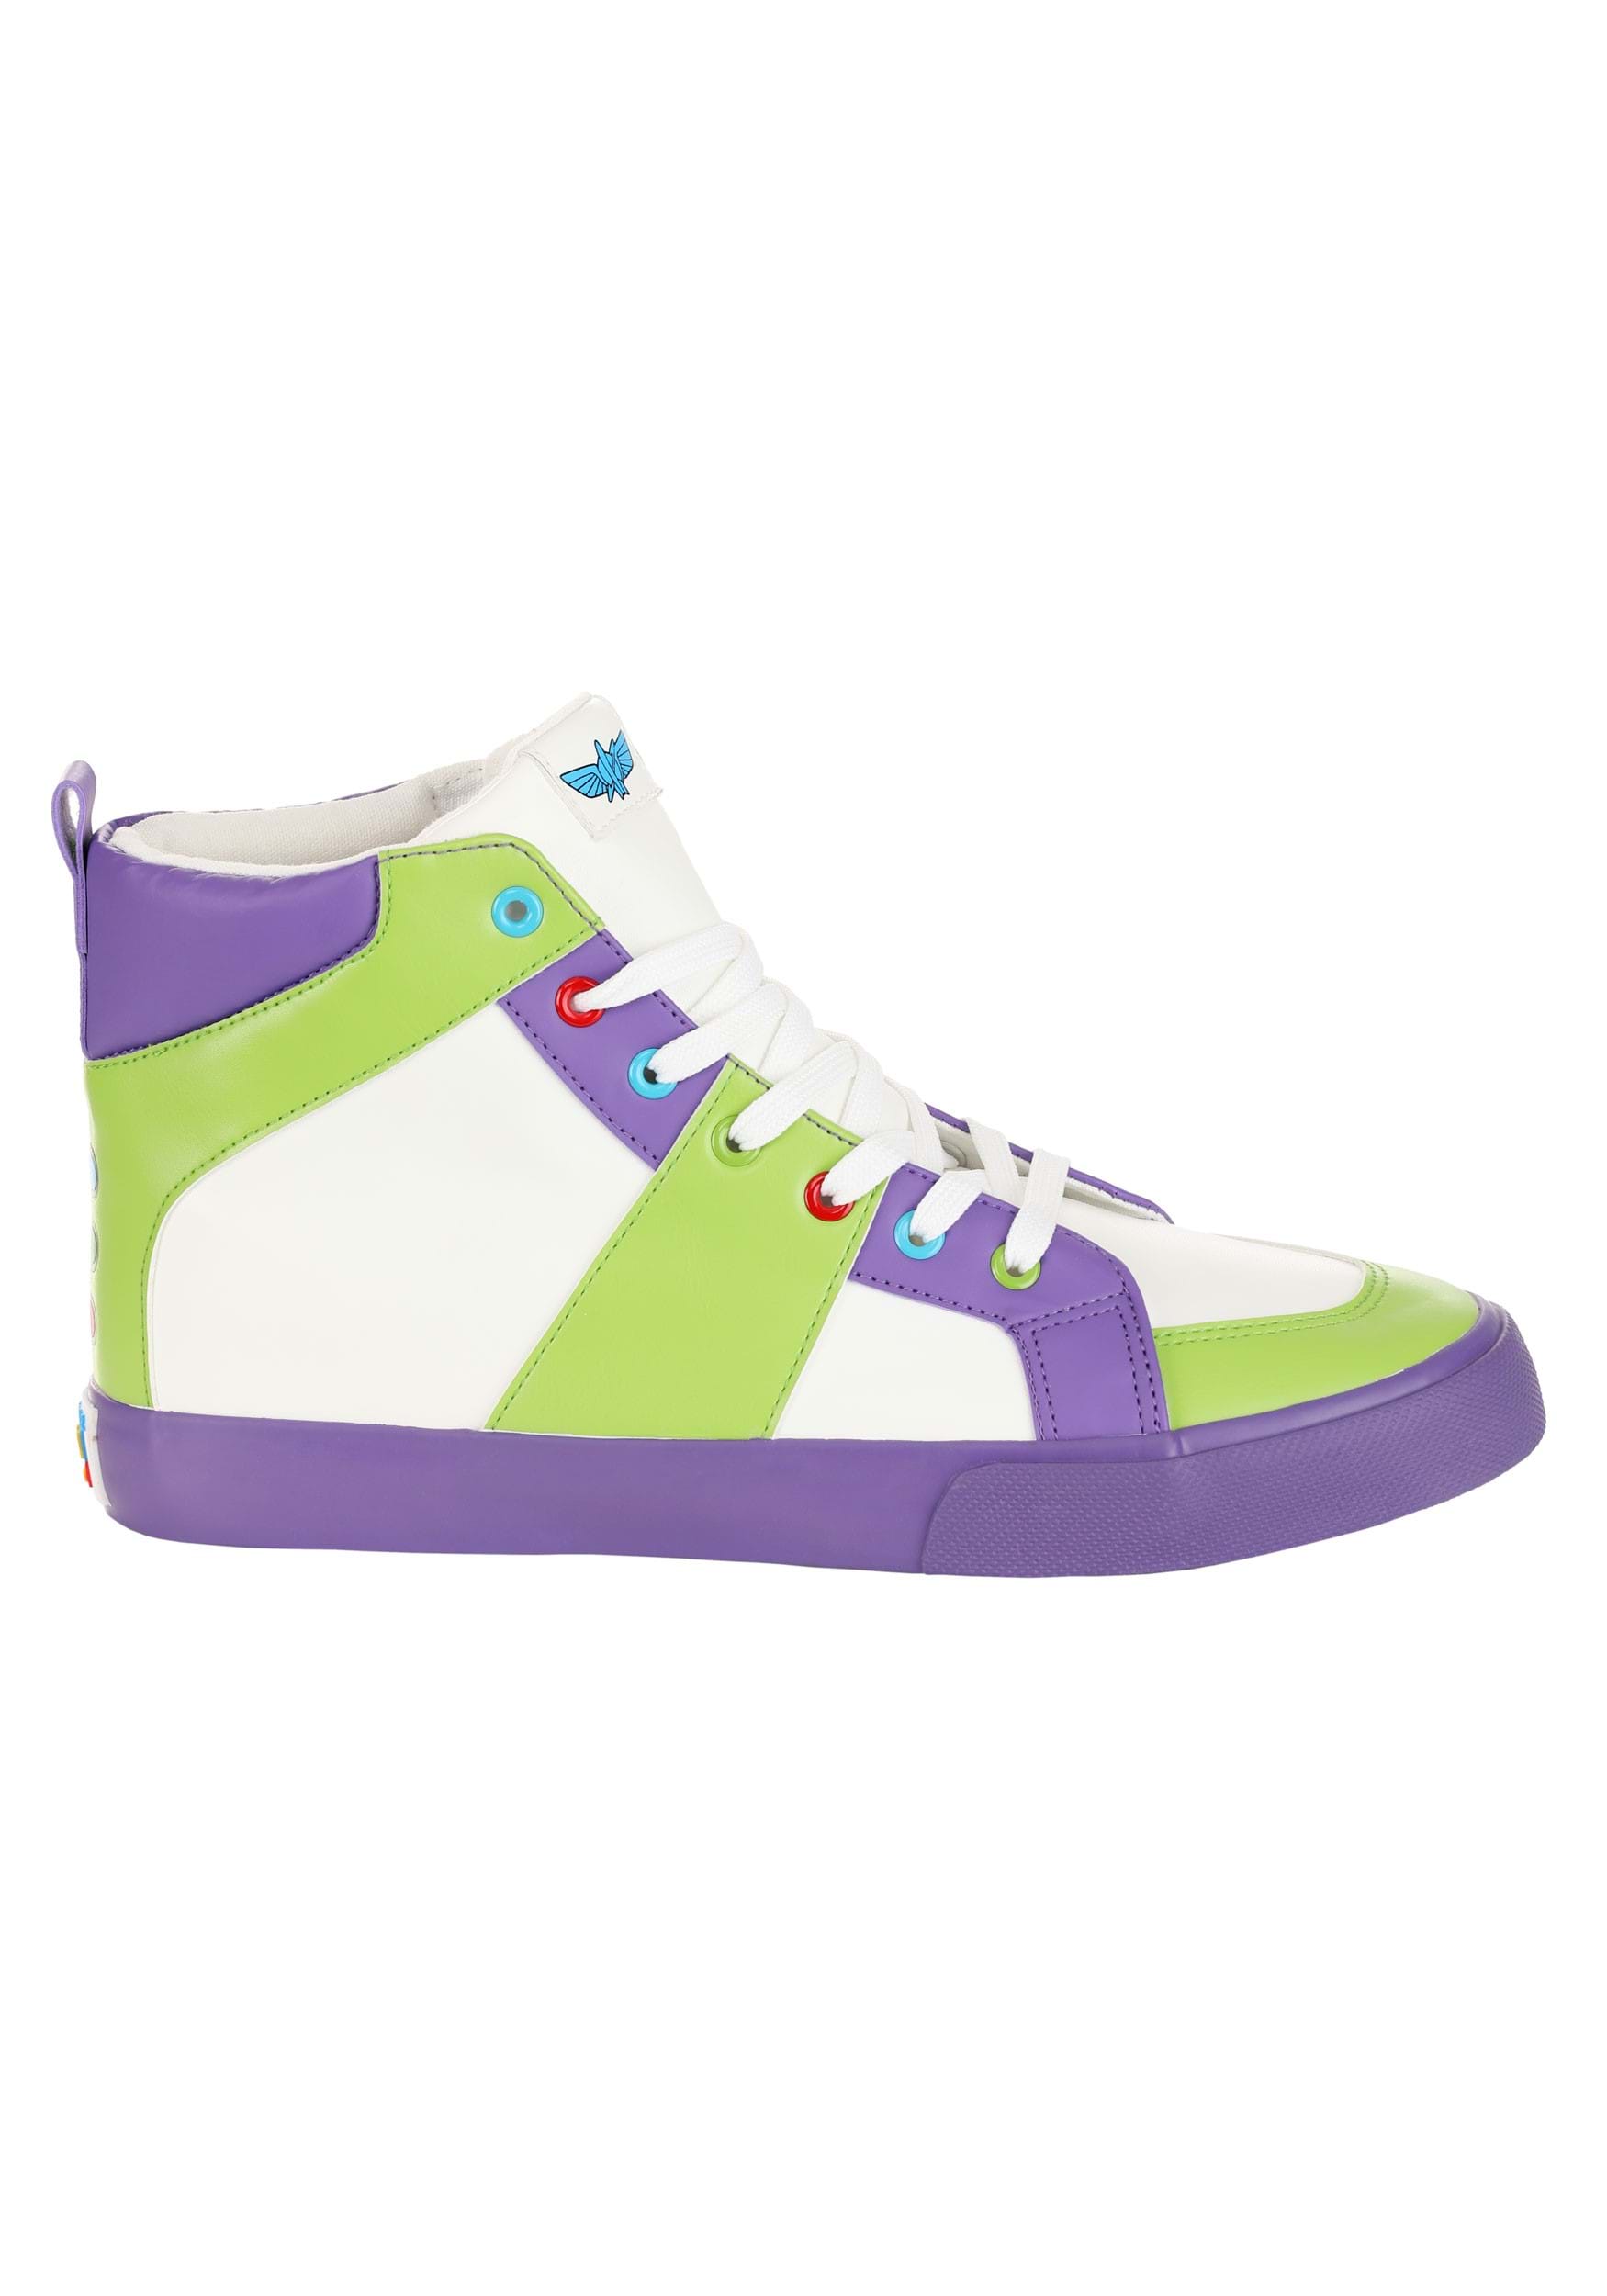 Buzz Lightyear Kid's High Top Shoes